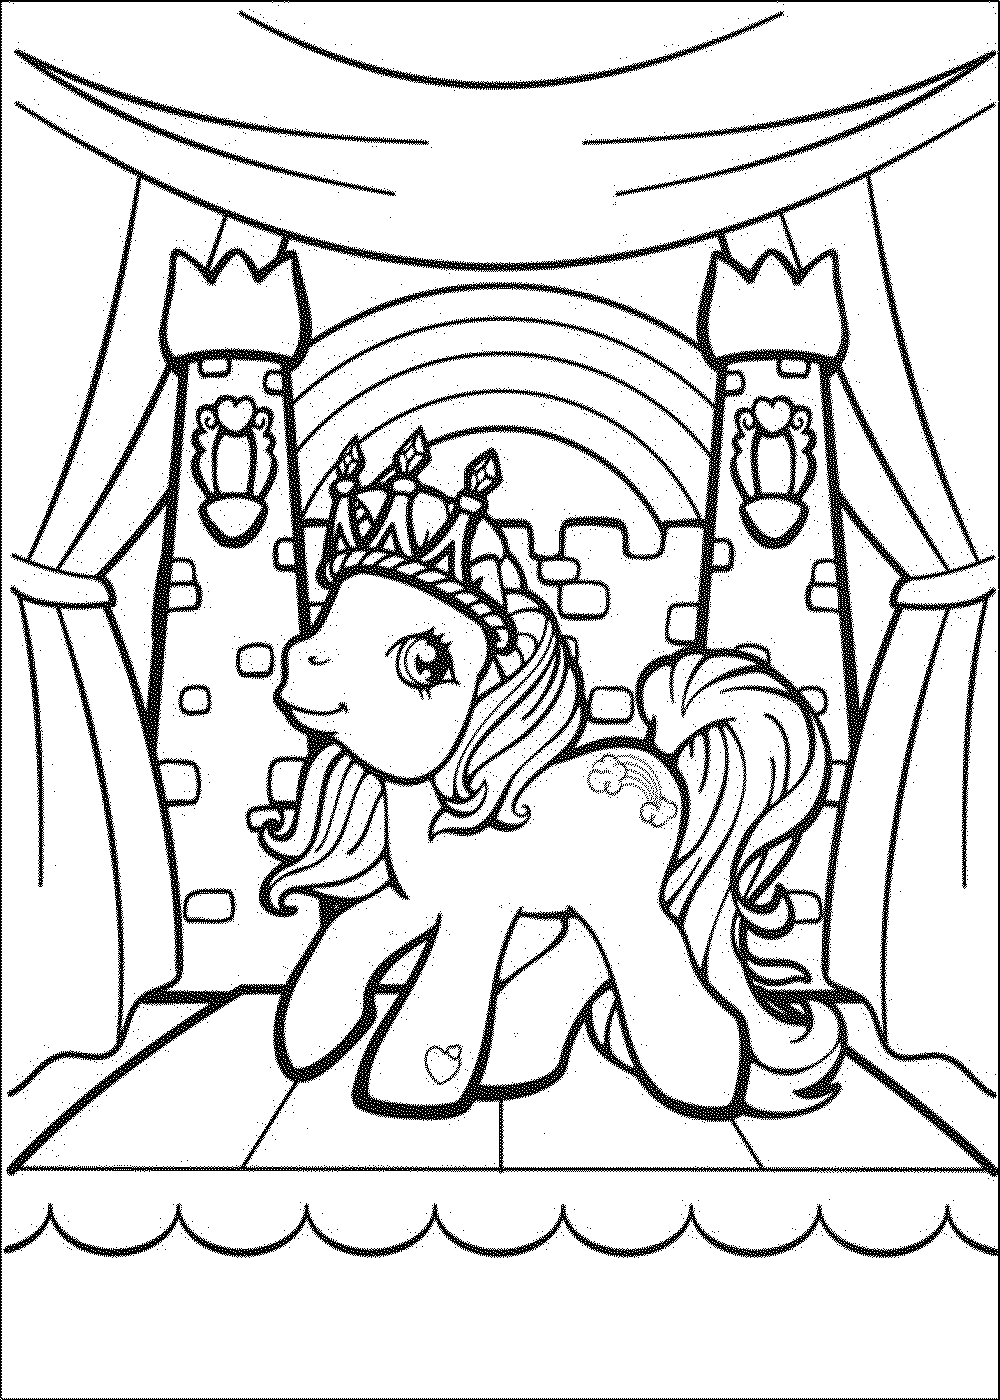 my little pony coloring pages pinkie pie